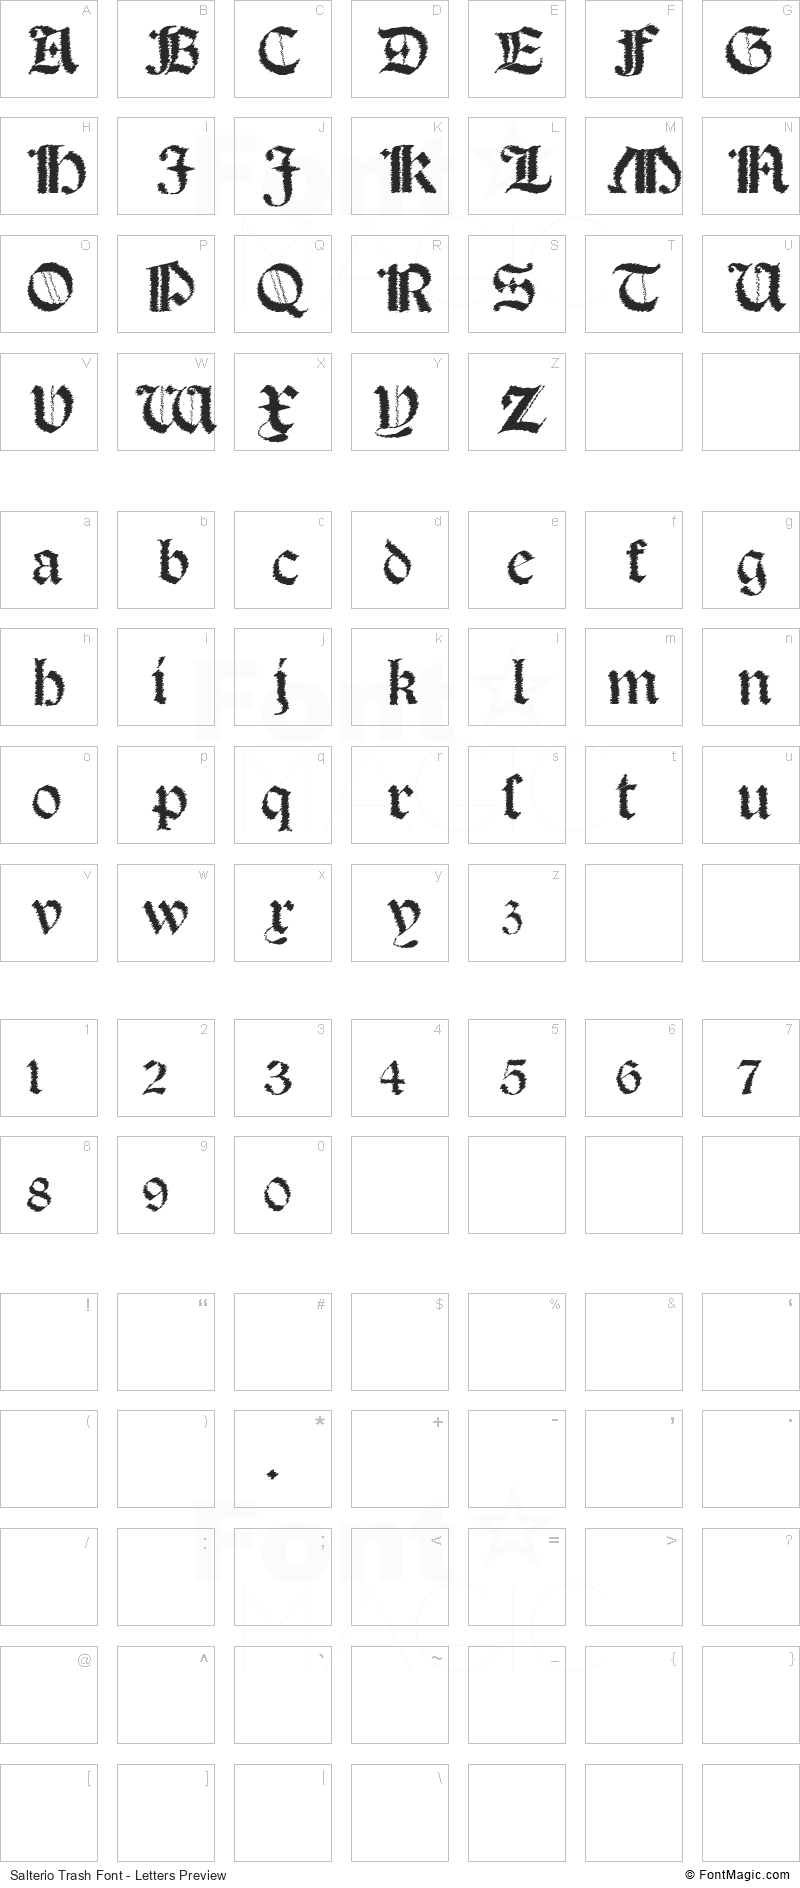 Salterio Trash Font - All Latters Preview Chart